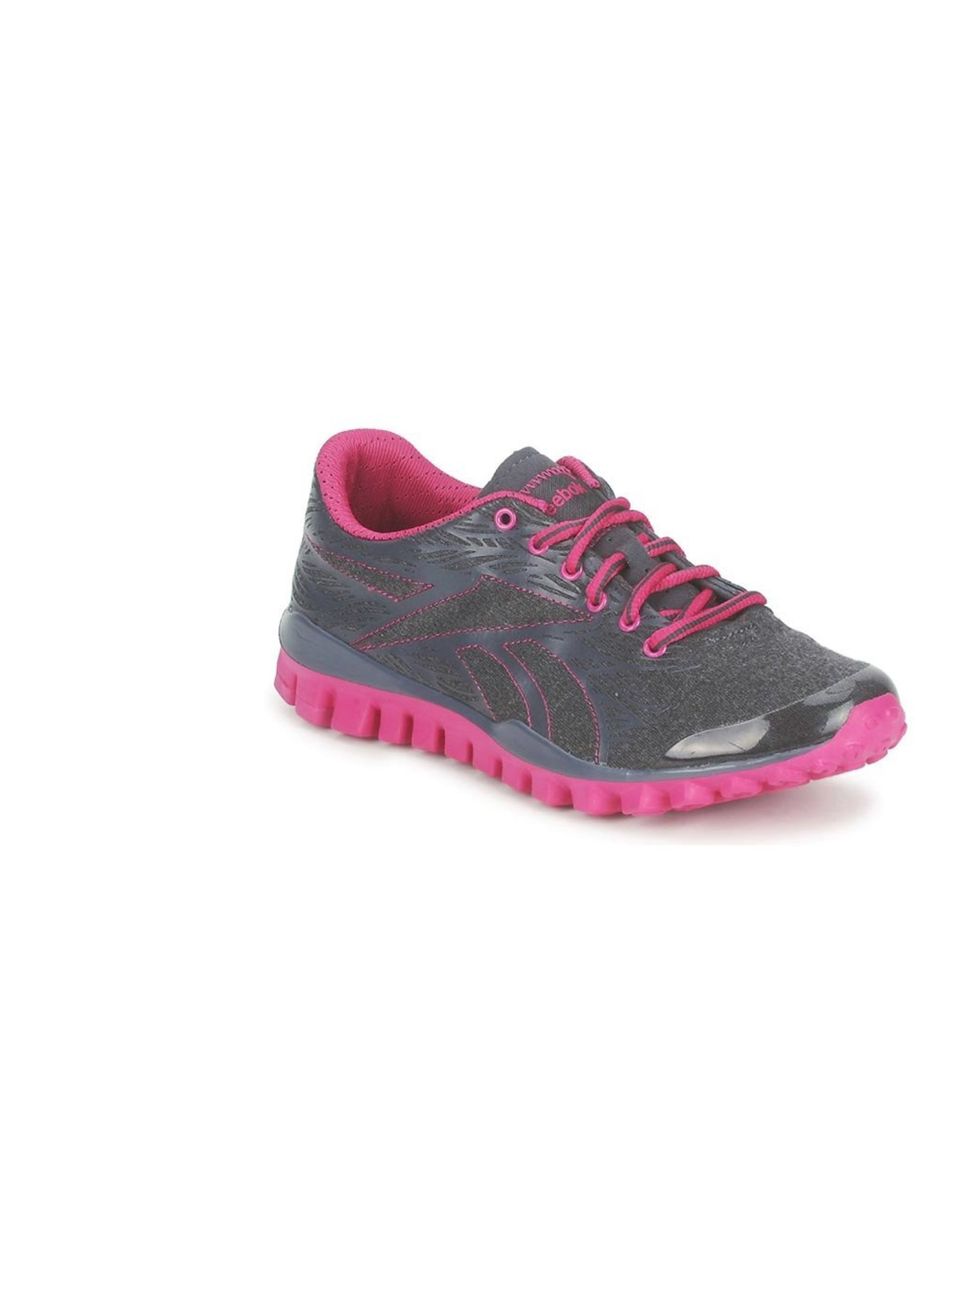 <p><strong><a href="http://shop.reebok.com/GB/search?t=realflex&amp;cm_sp=Brand-_-ProductBLock-_-Shop_RealFlex&amp;cm_sp=Brand-_-ProductBlock-_-Custom_fitness_menswomens_realflex_RealFlex_promo">Reebok</a> RealFlex Train £65</strong></p><p><strong>Weight: